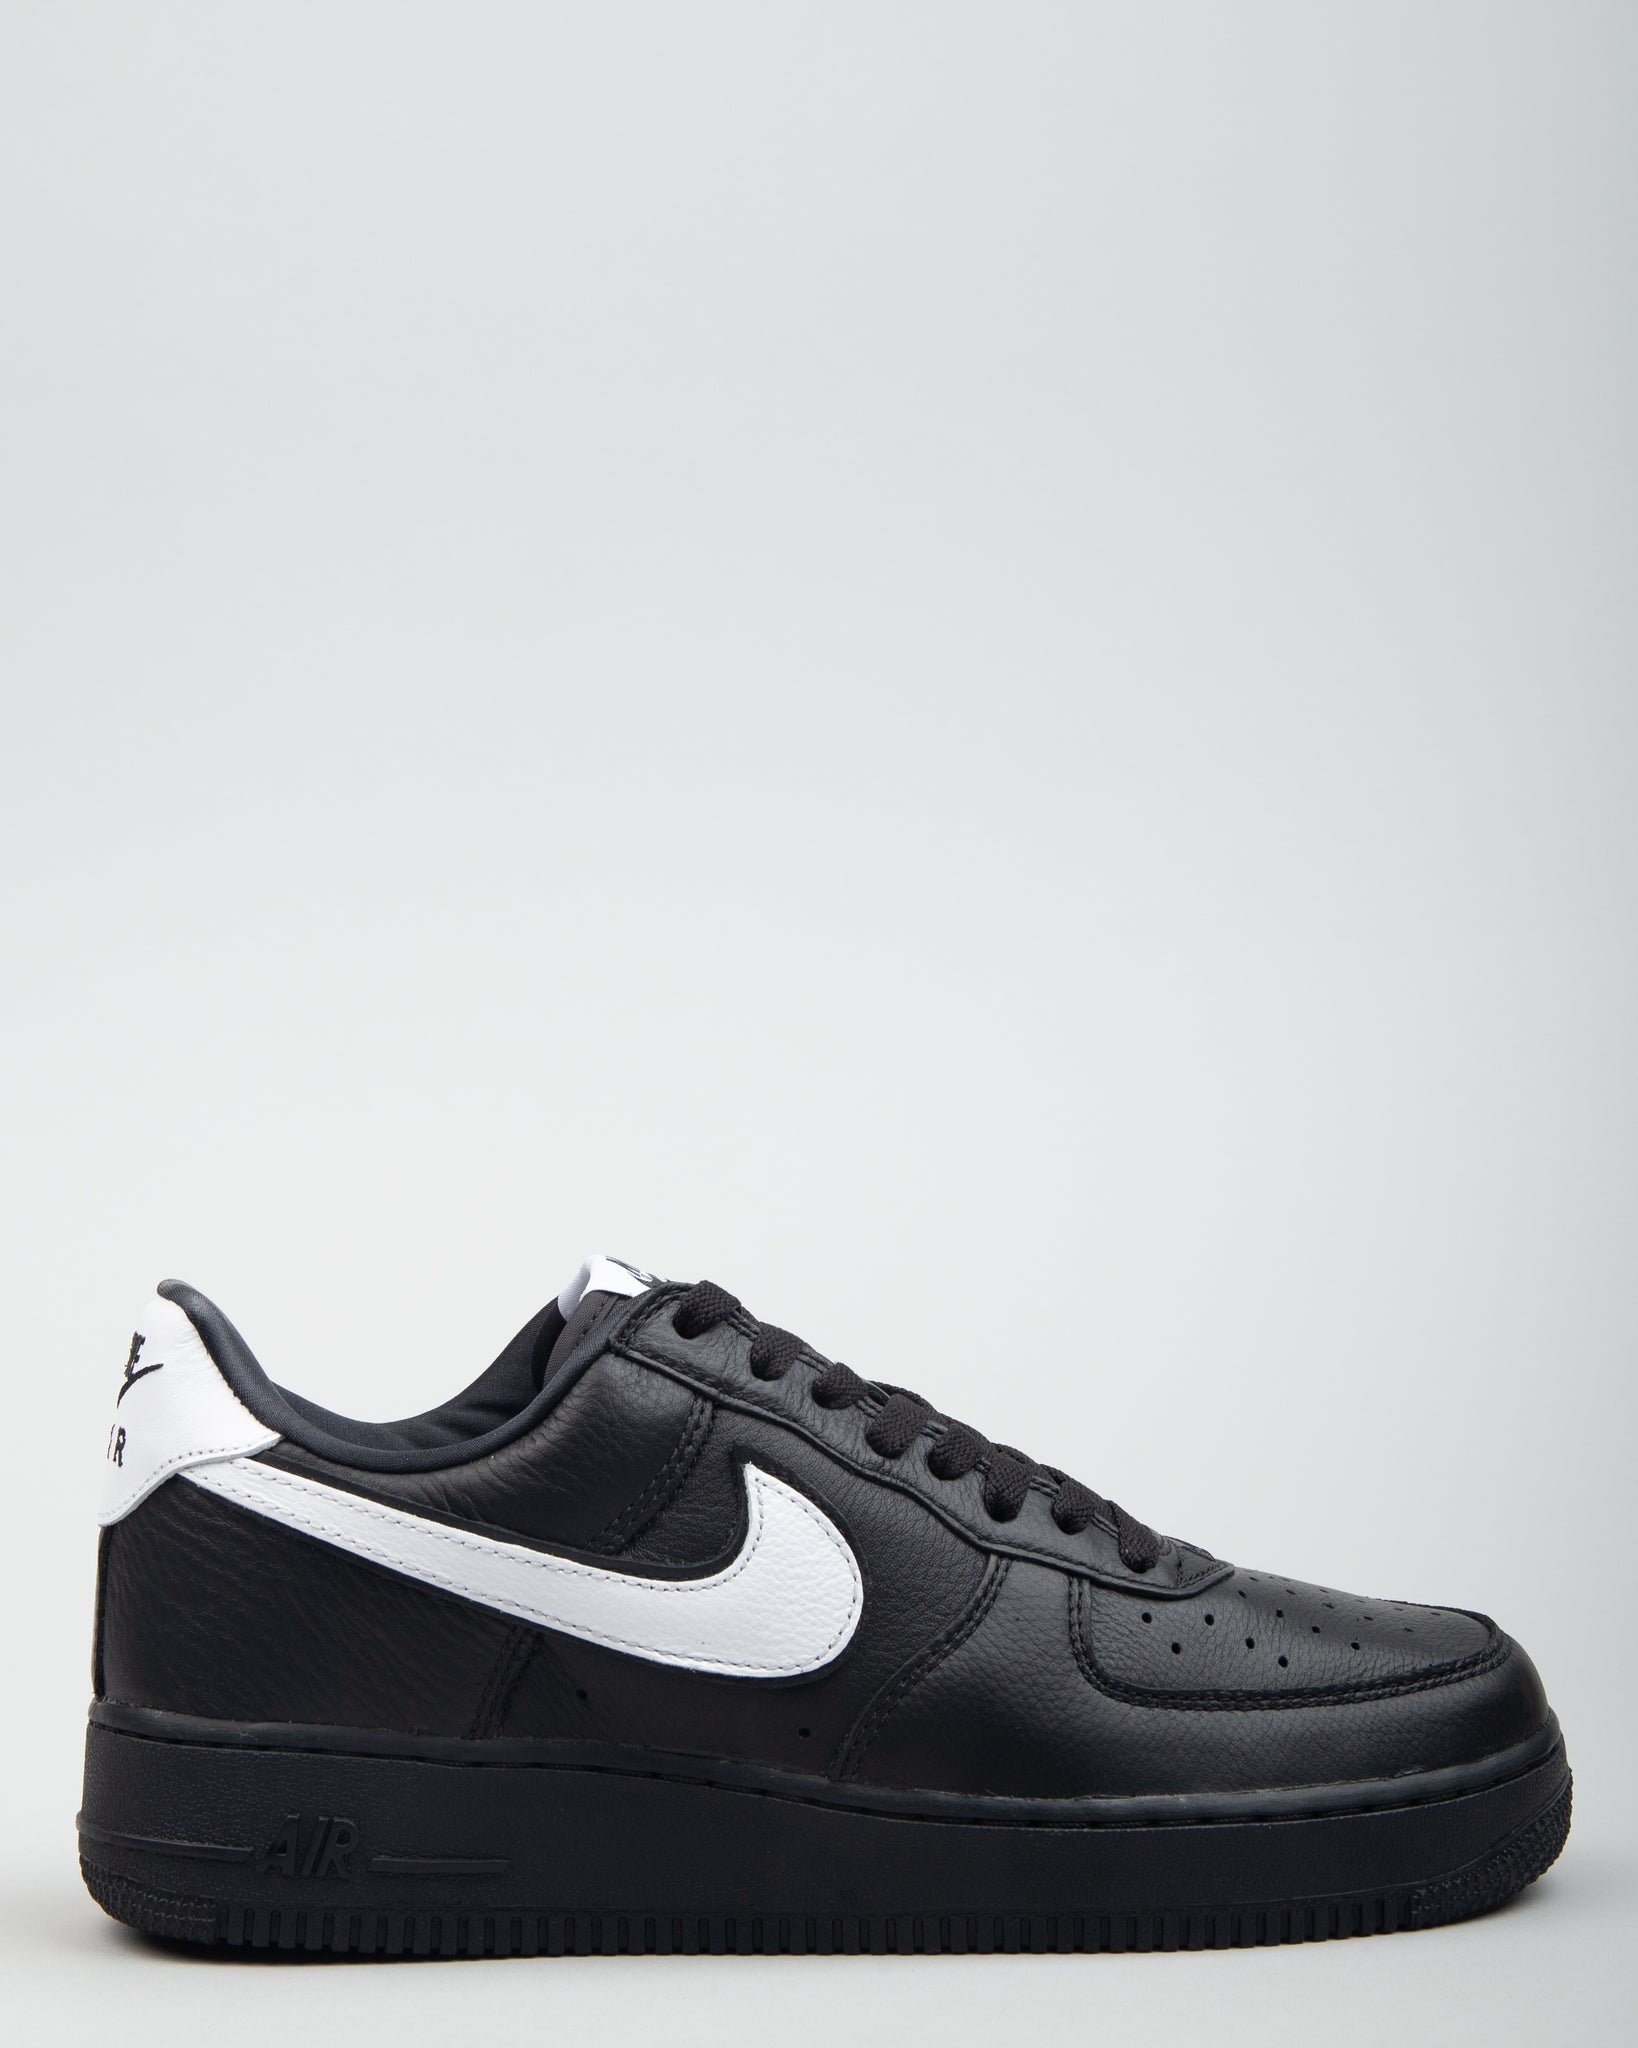 nike af1 low black and white